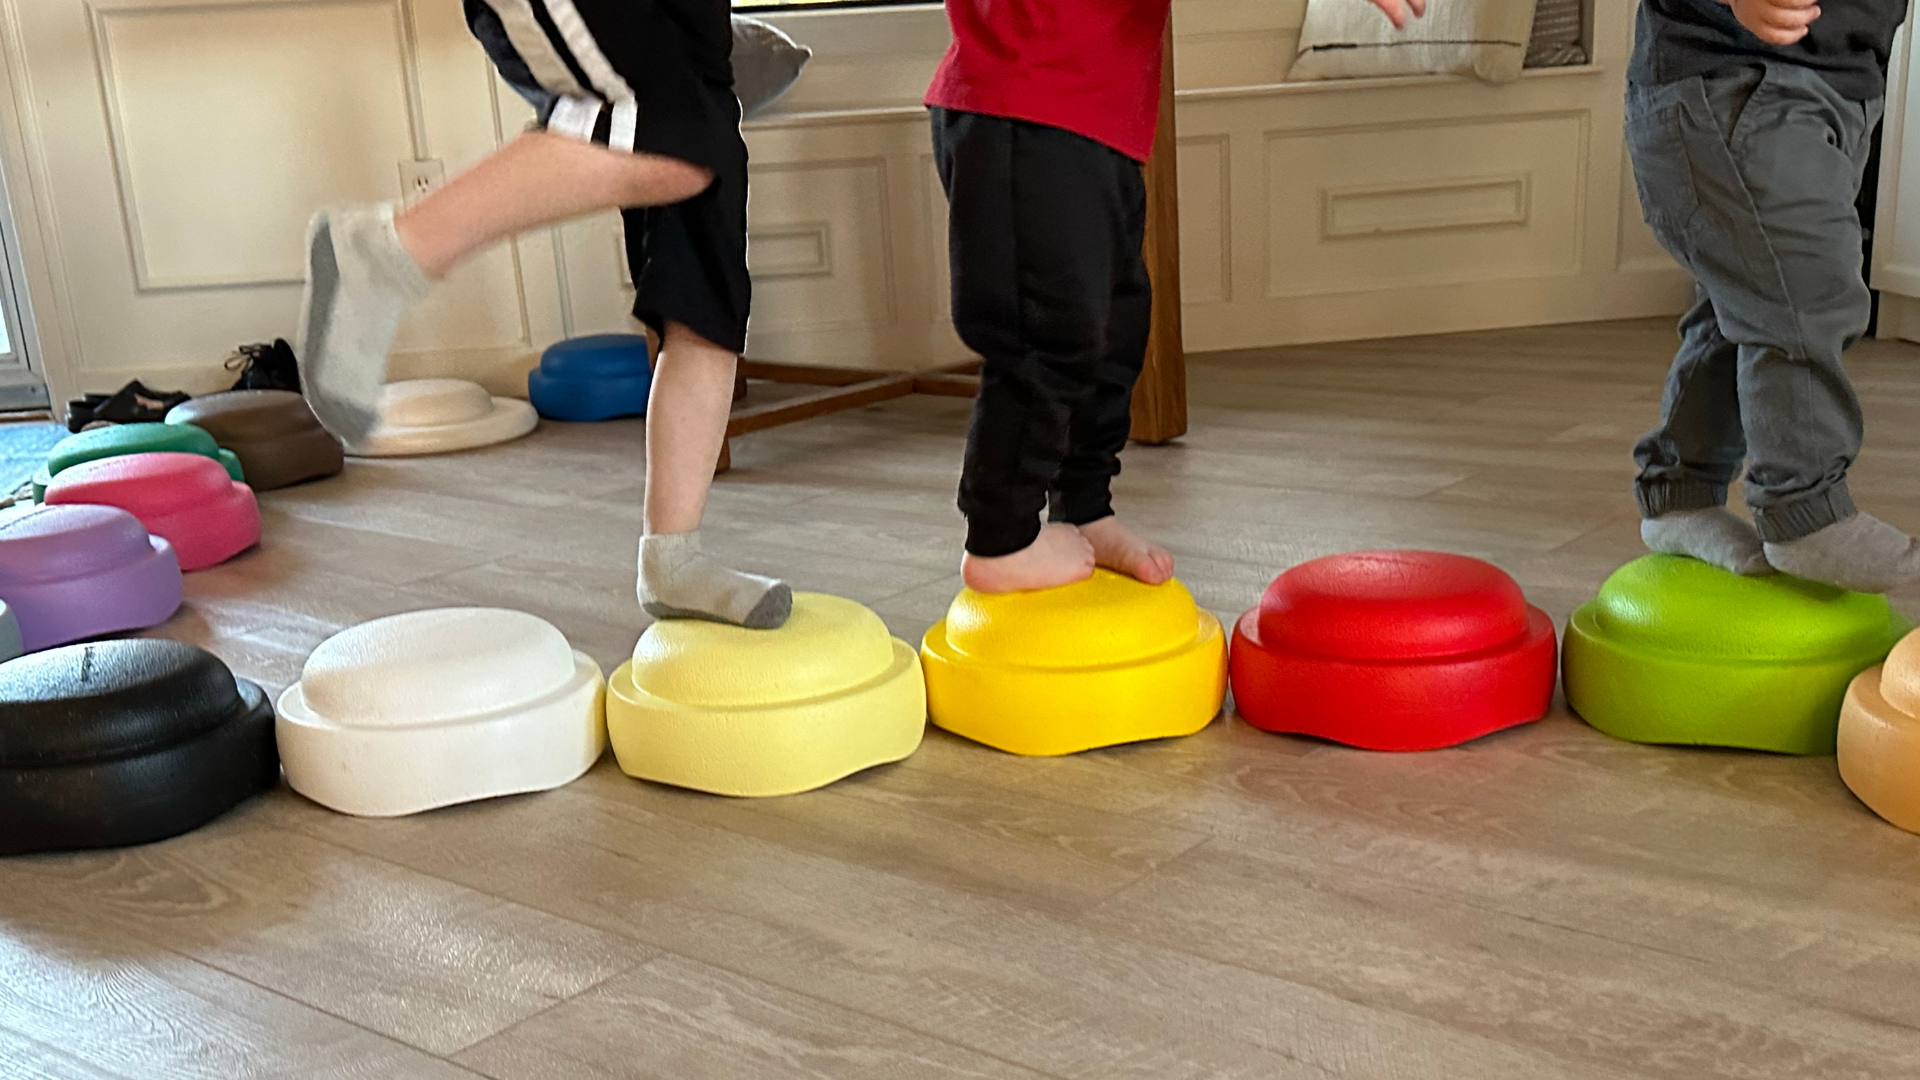 Versatile stacking stones in different colors, for sorting, balance, fun, movement, play and imagination. Lightweight stepping stones, kids toys.